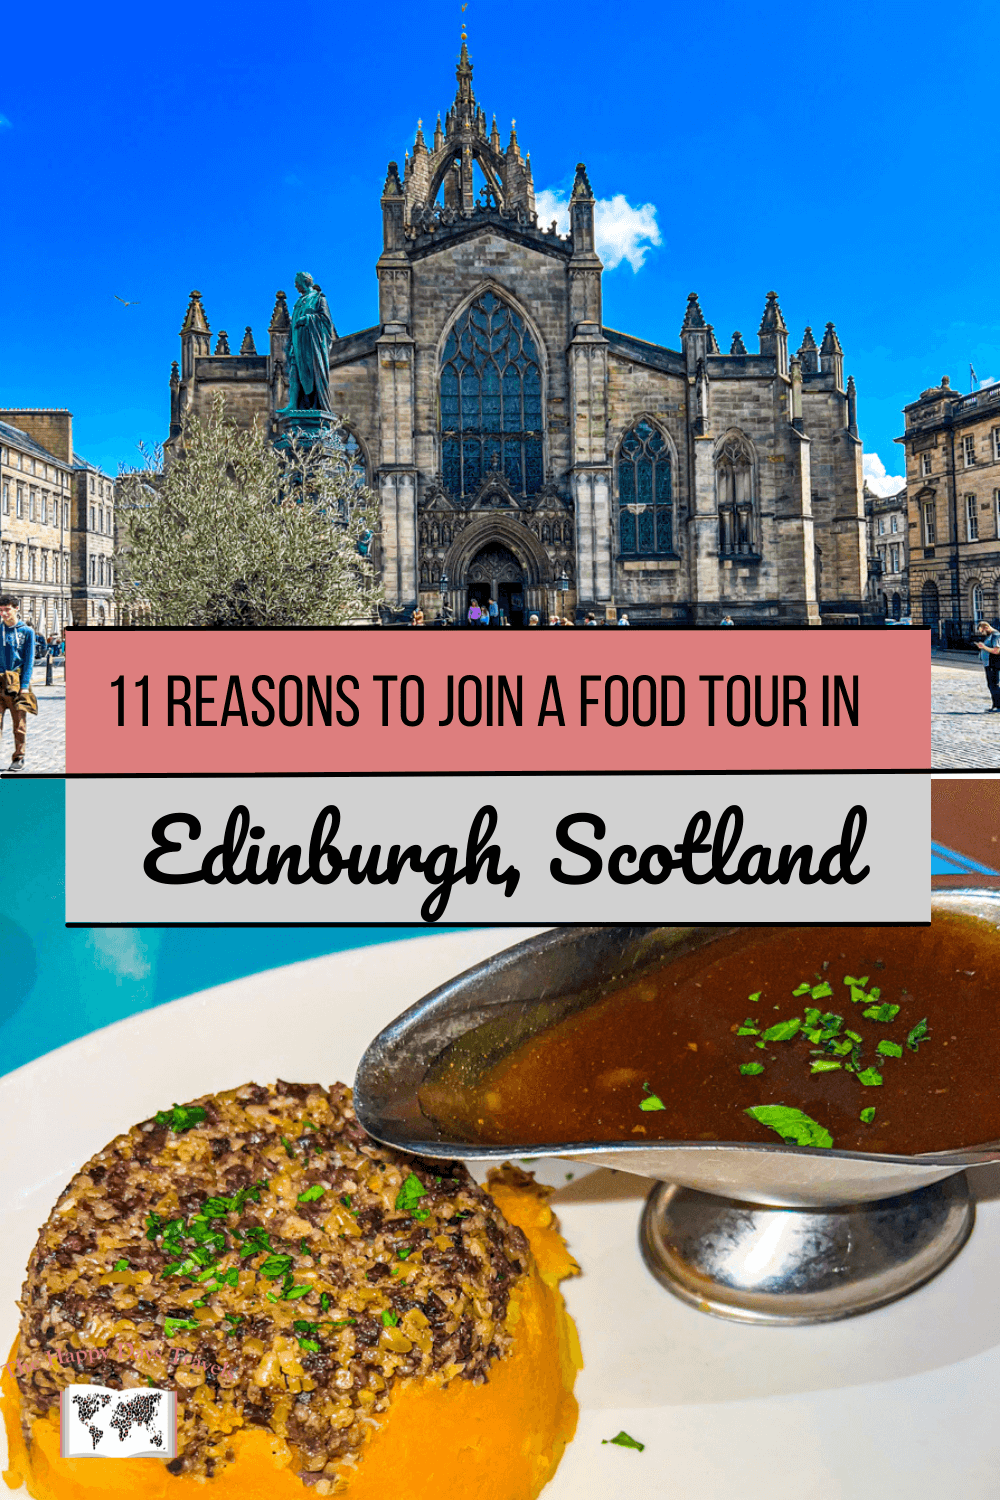 Pin image. Text reads '11 Reasons to Join a Food Tour in Edinburgh, Scotland' with image of St Giles Cathedral at the top and Haggis Neeps and Tatties on the bottom.